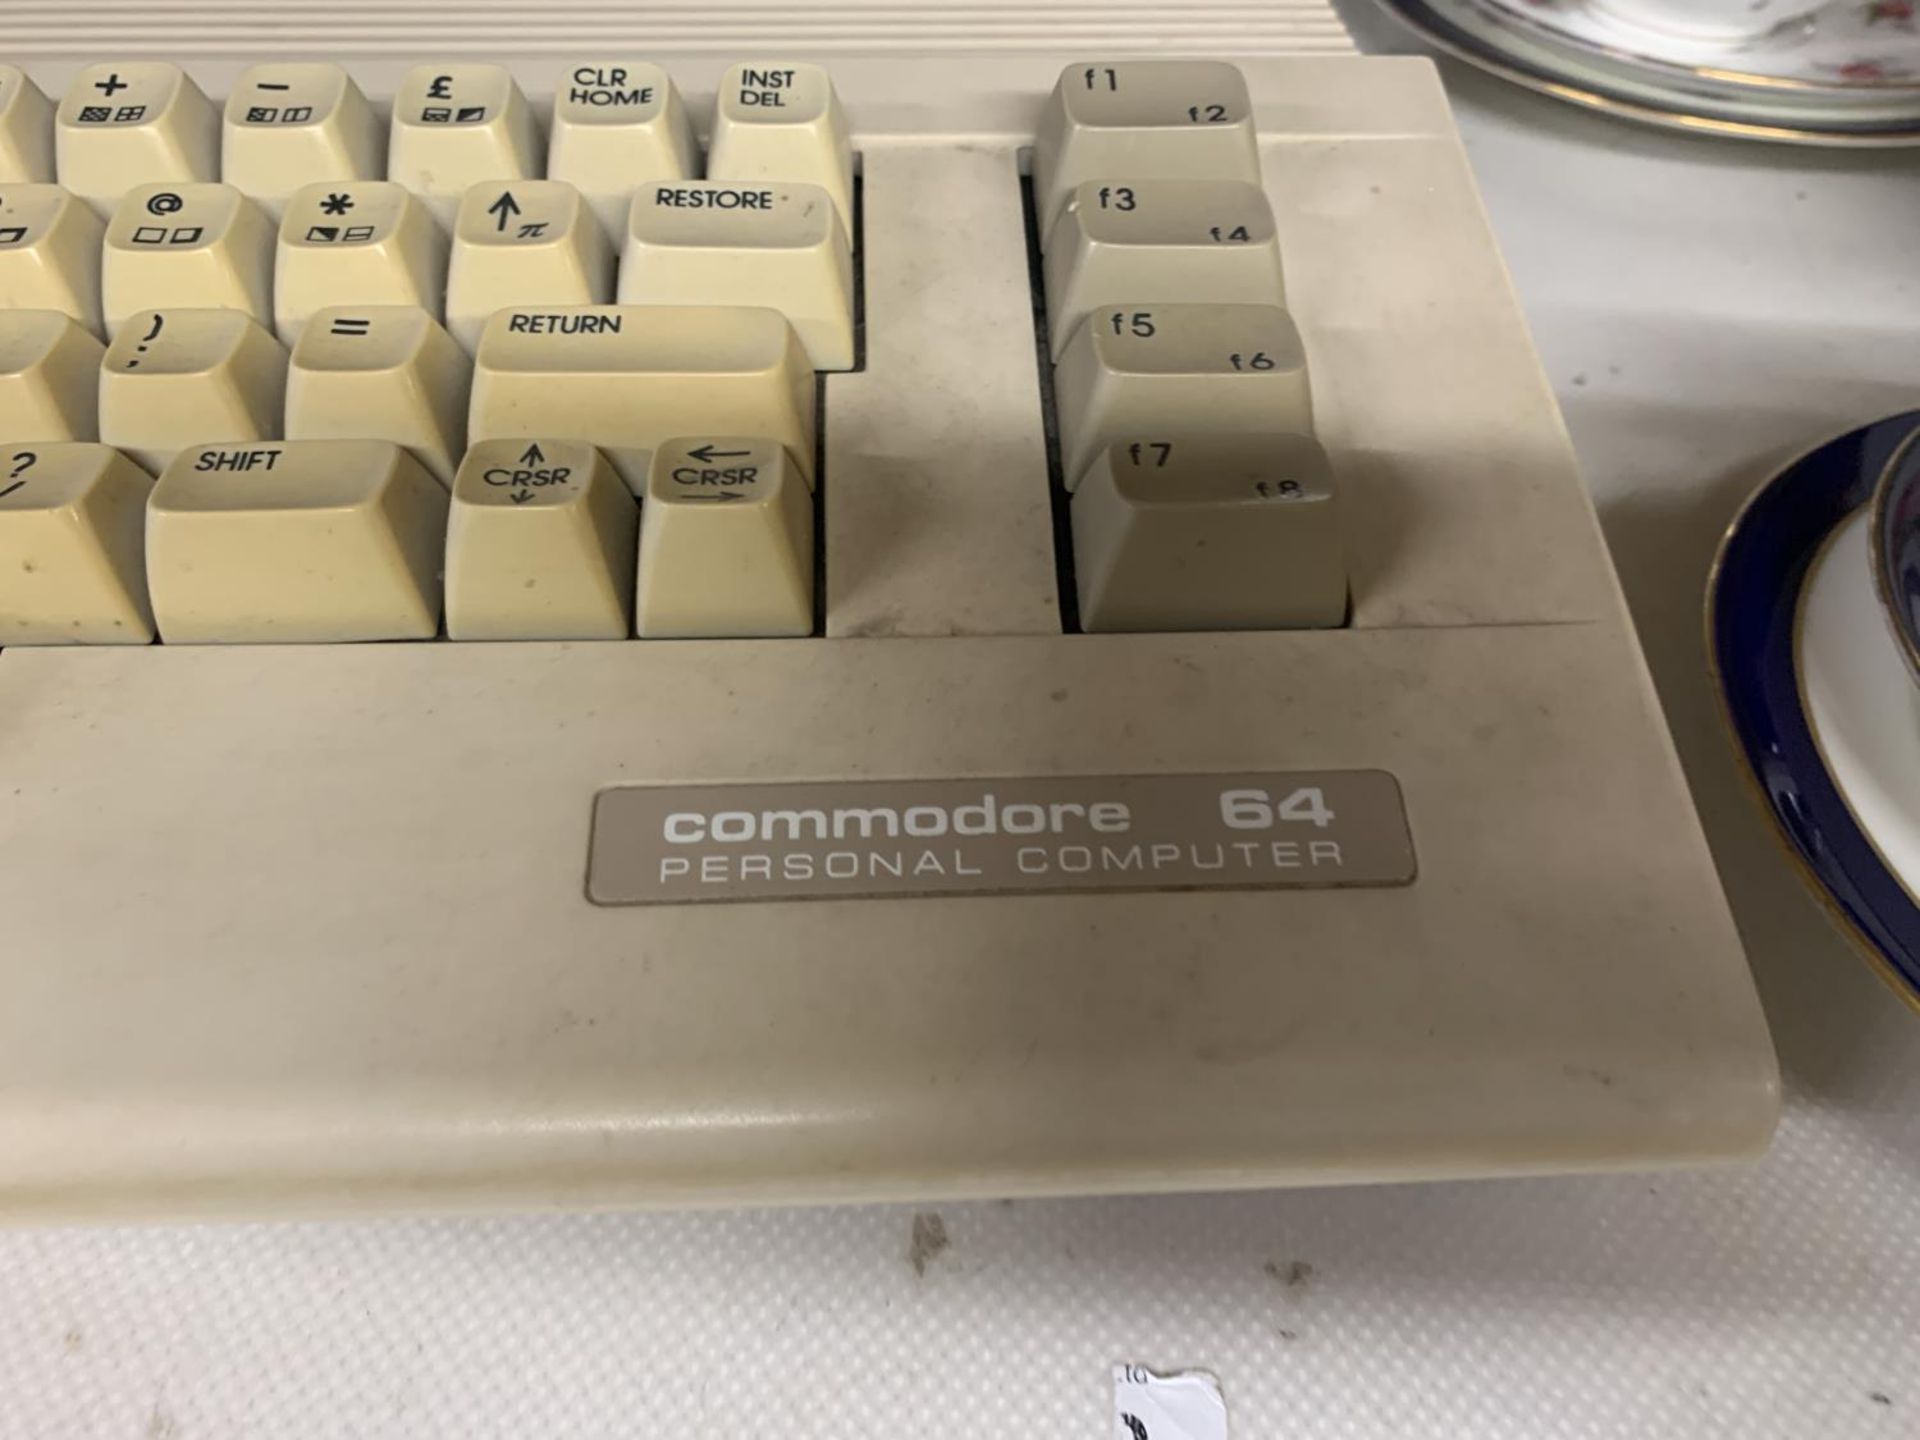 A COMMODORE 64 PERSONAL COMPUTER - Image 2 of 3